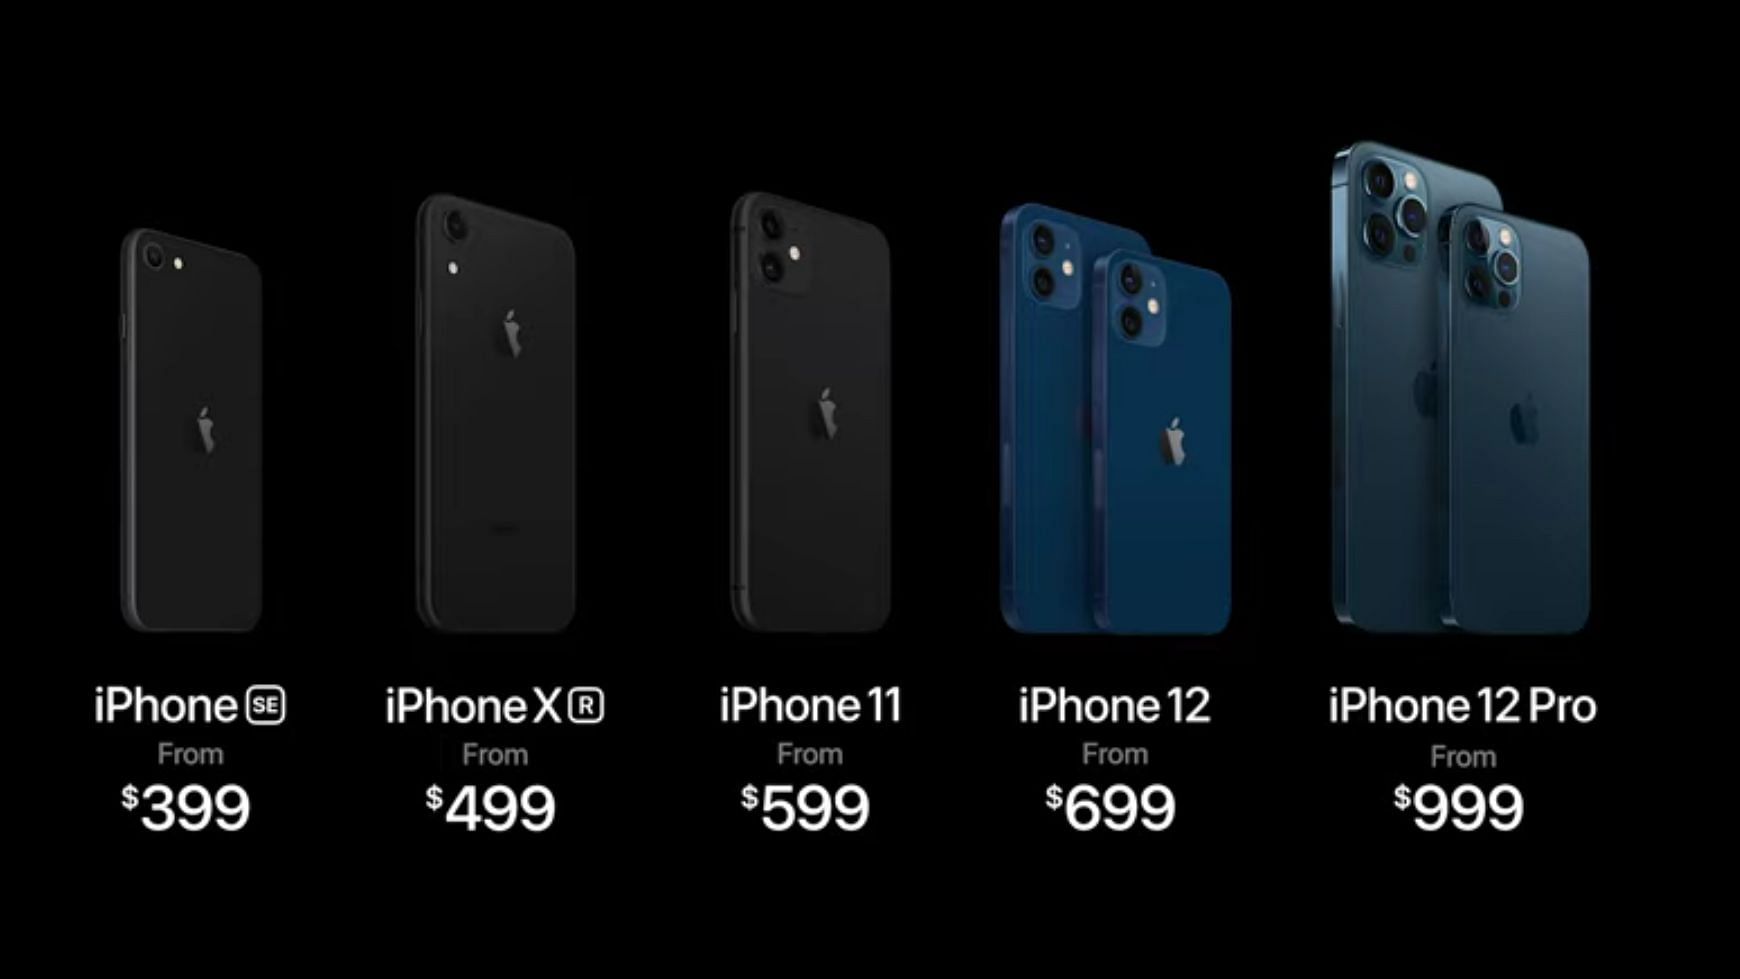 Apple Iphone 12 Iphone Pro Pre Orders Apple Iphone 12 And Iphone 12 Pro Pre Orders Now Available